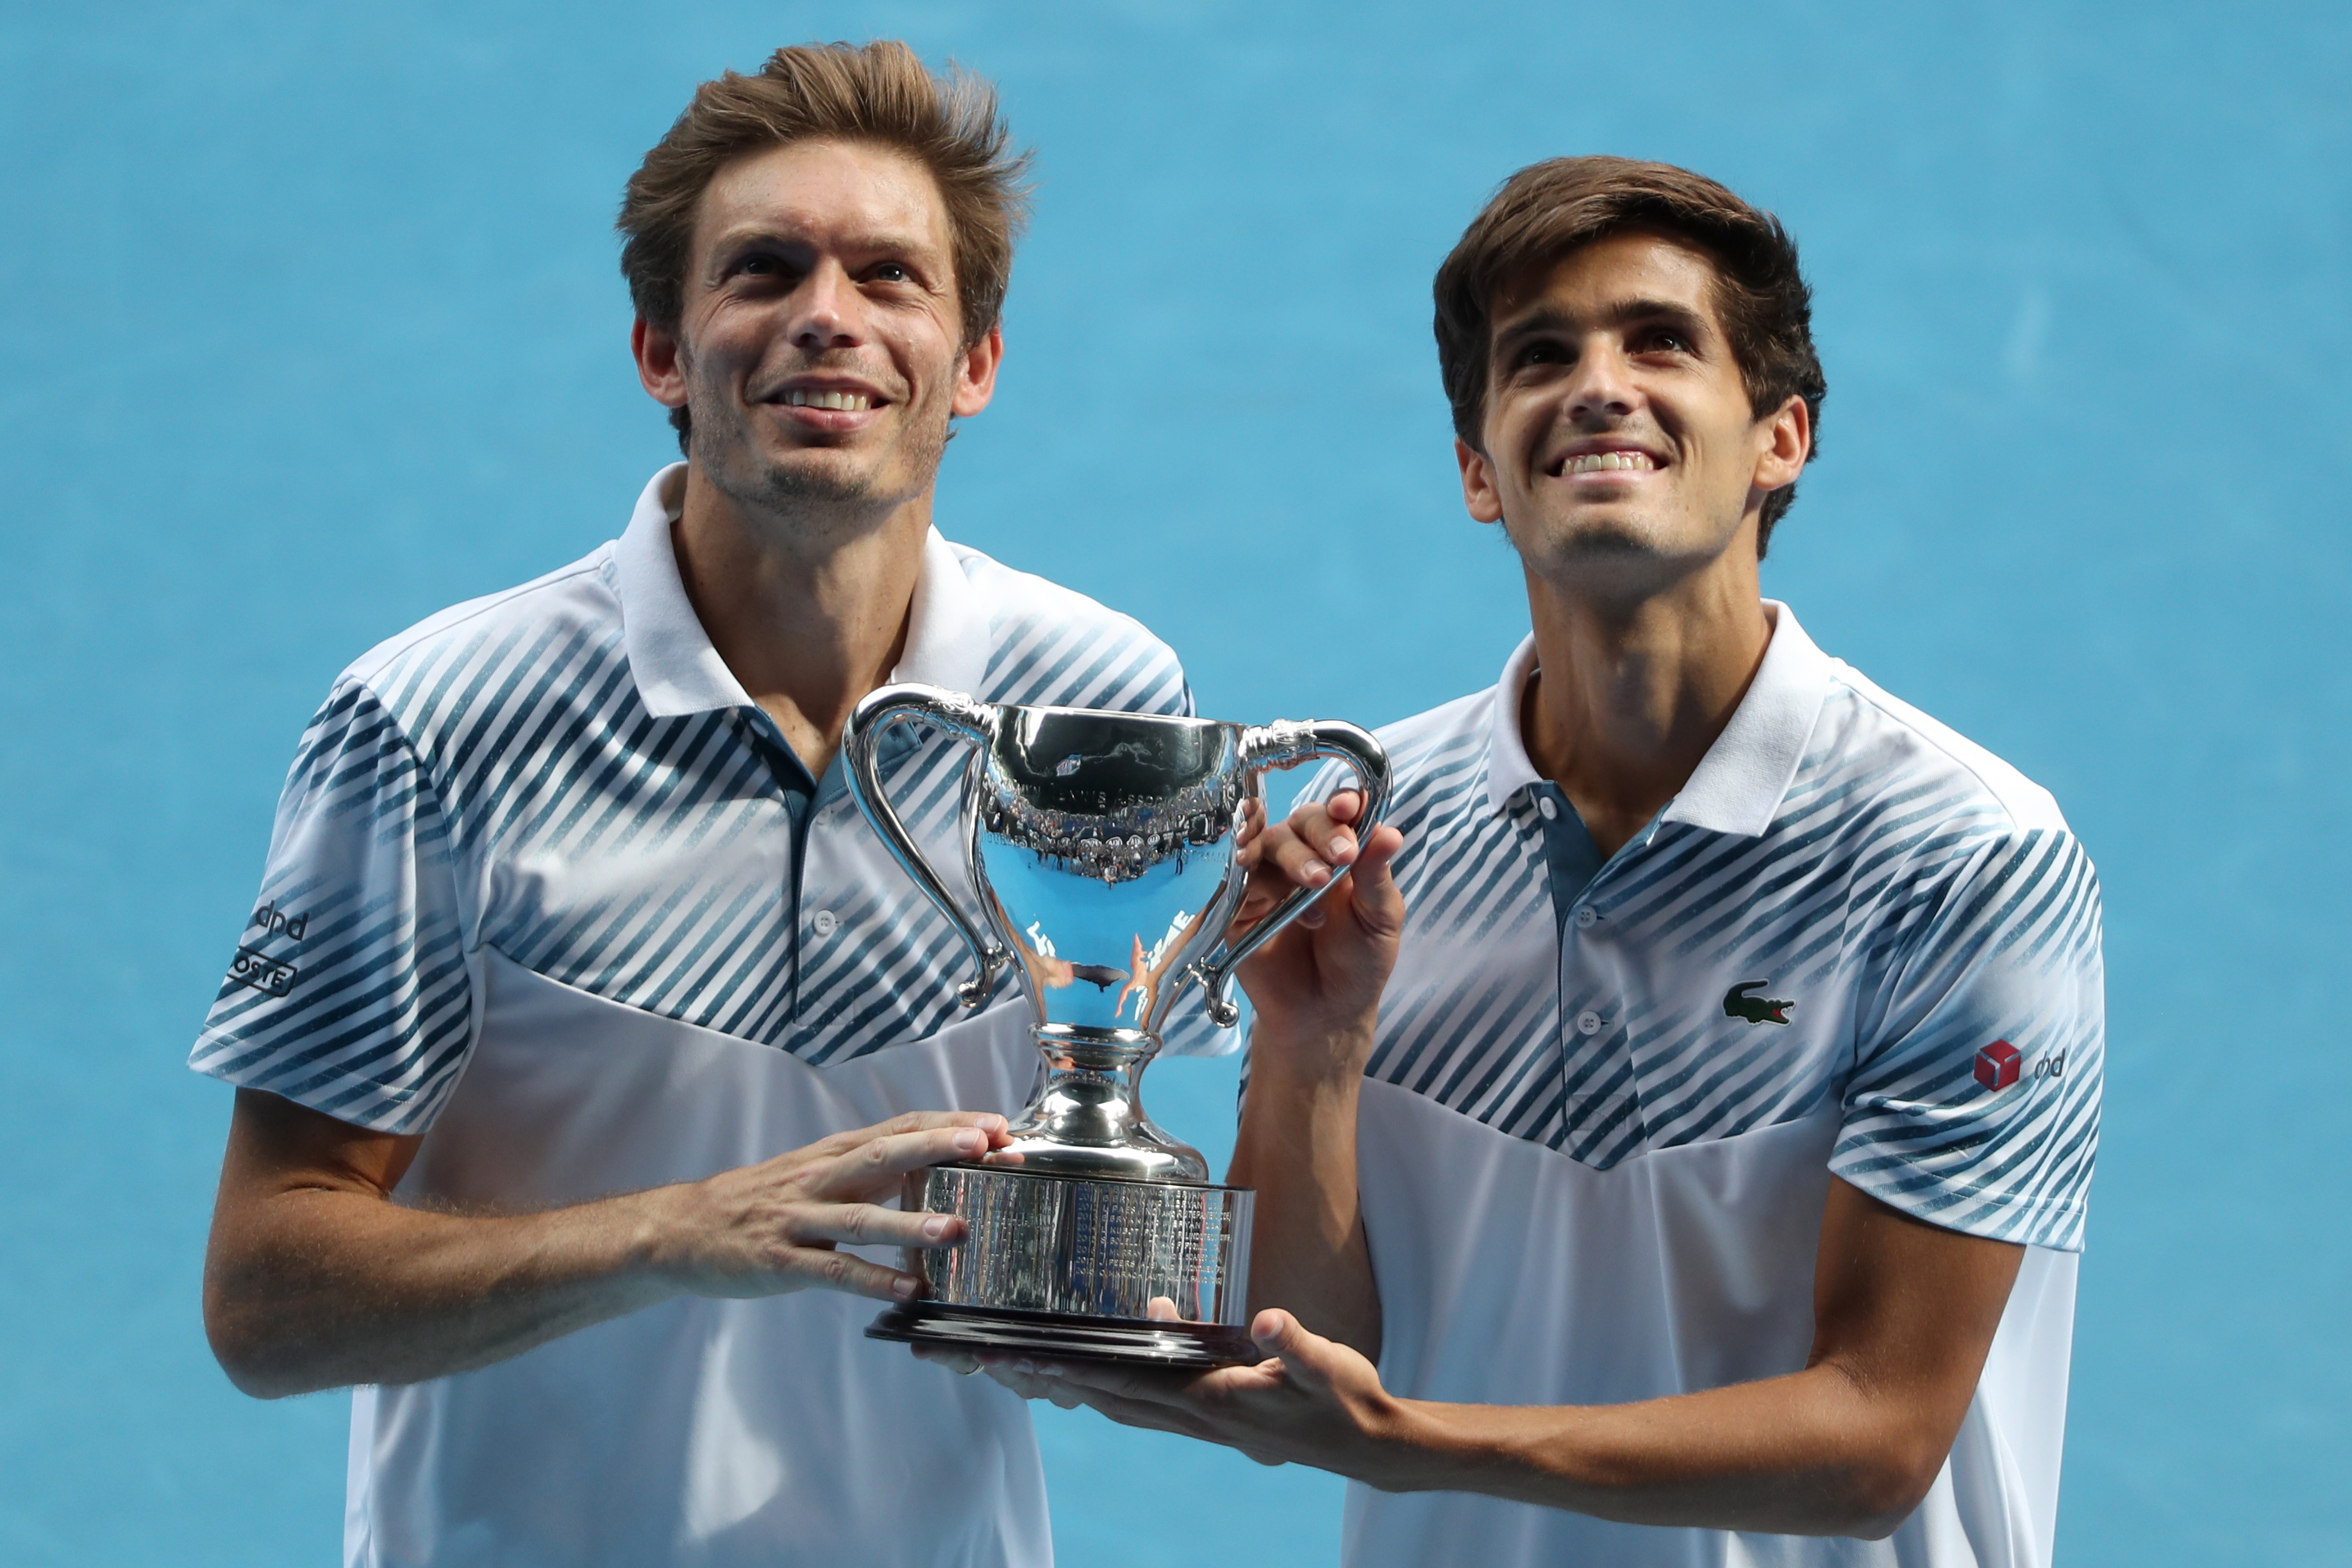 epa07323367 Nicolas Mahut of France (L) and Pierre-Hugues Herbert (R) of France pose for a photograph with the winner's trophy after defeating Henri Kontinen of Finland and John Peers of Australia in the men's doubles final on day fourteen of the Australian Open tennis tournament in Melbourne, Australia, 27 January 2019.  EPA/DAVID CROSLING  AUSTRALIA AND NEW ZEALAND OUT